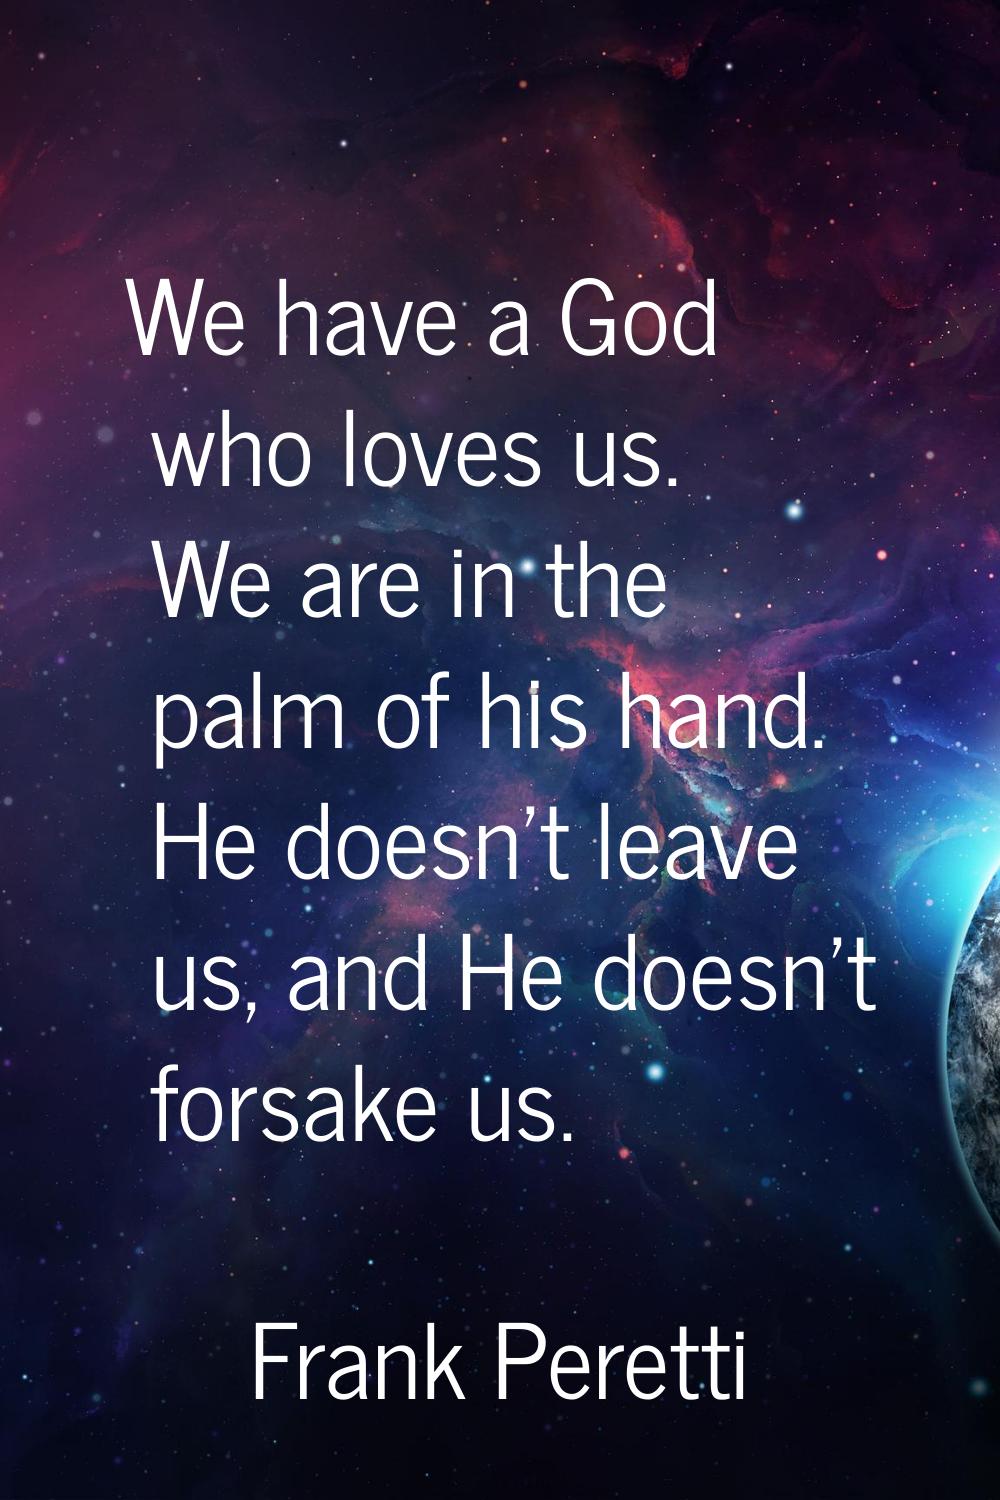 We have a God who loves us. We are in the palm of his hand. He doesn't leave us, and He doesn't for